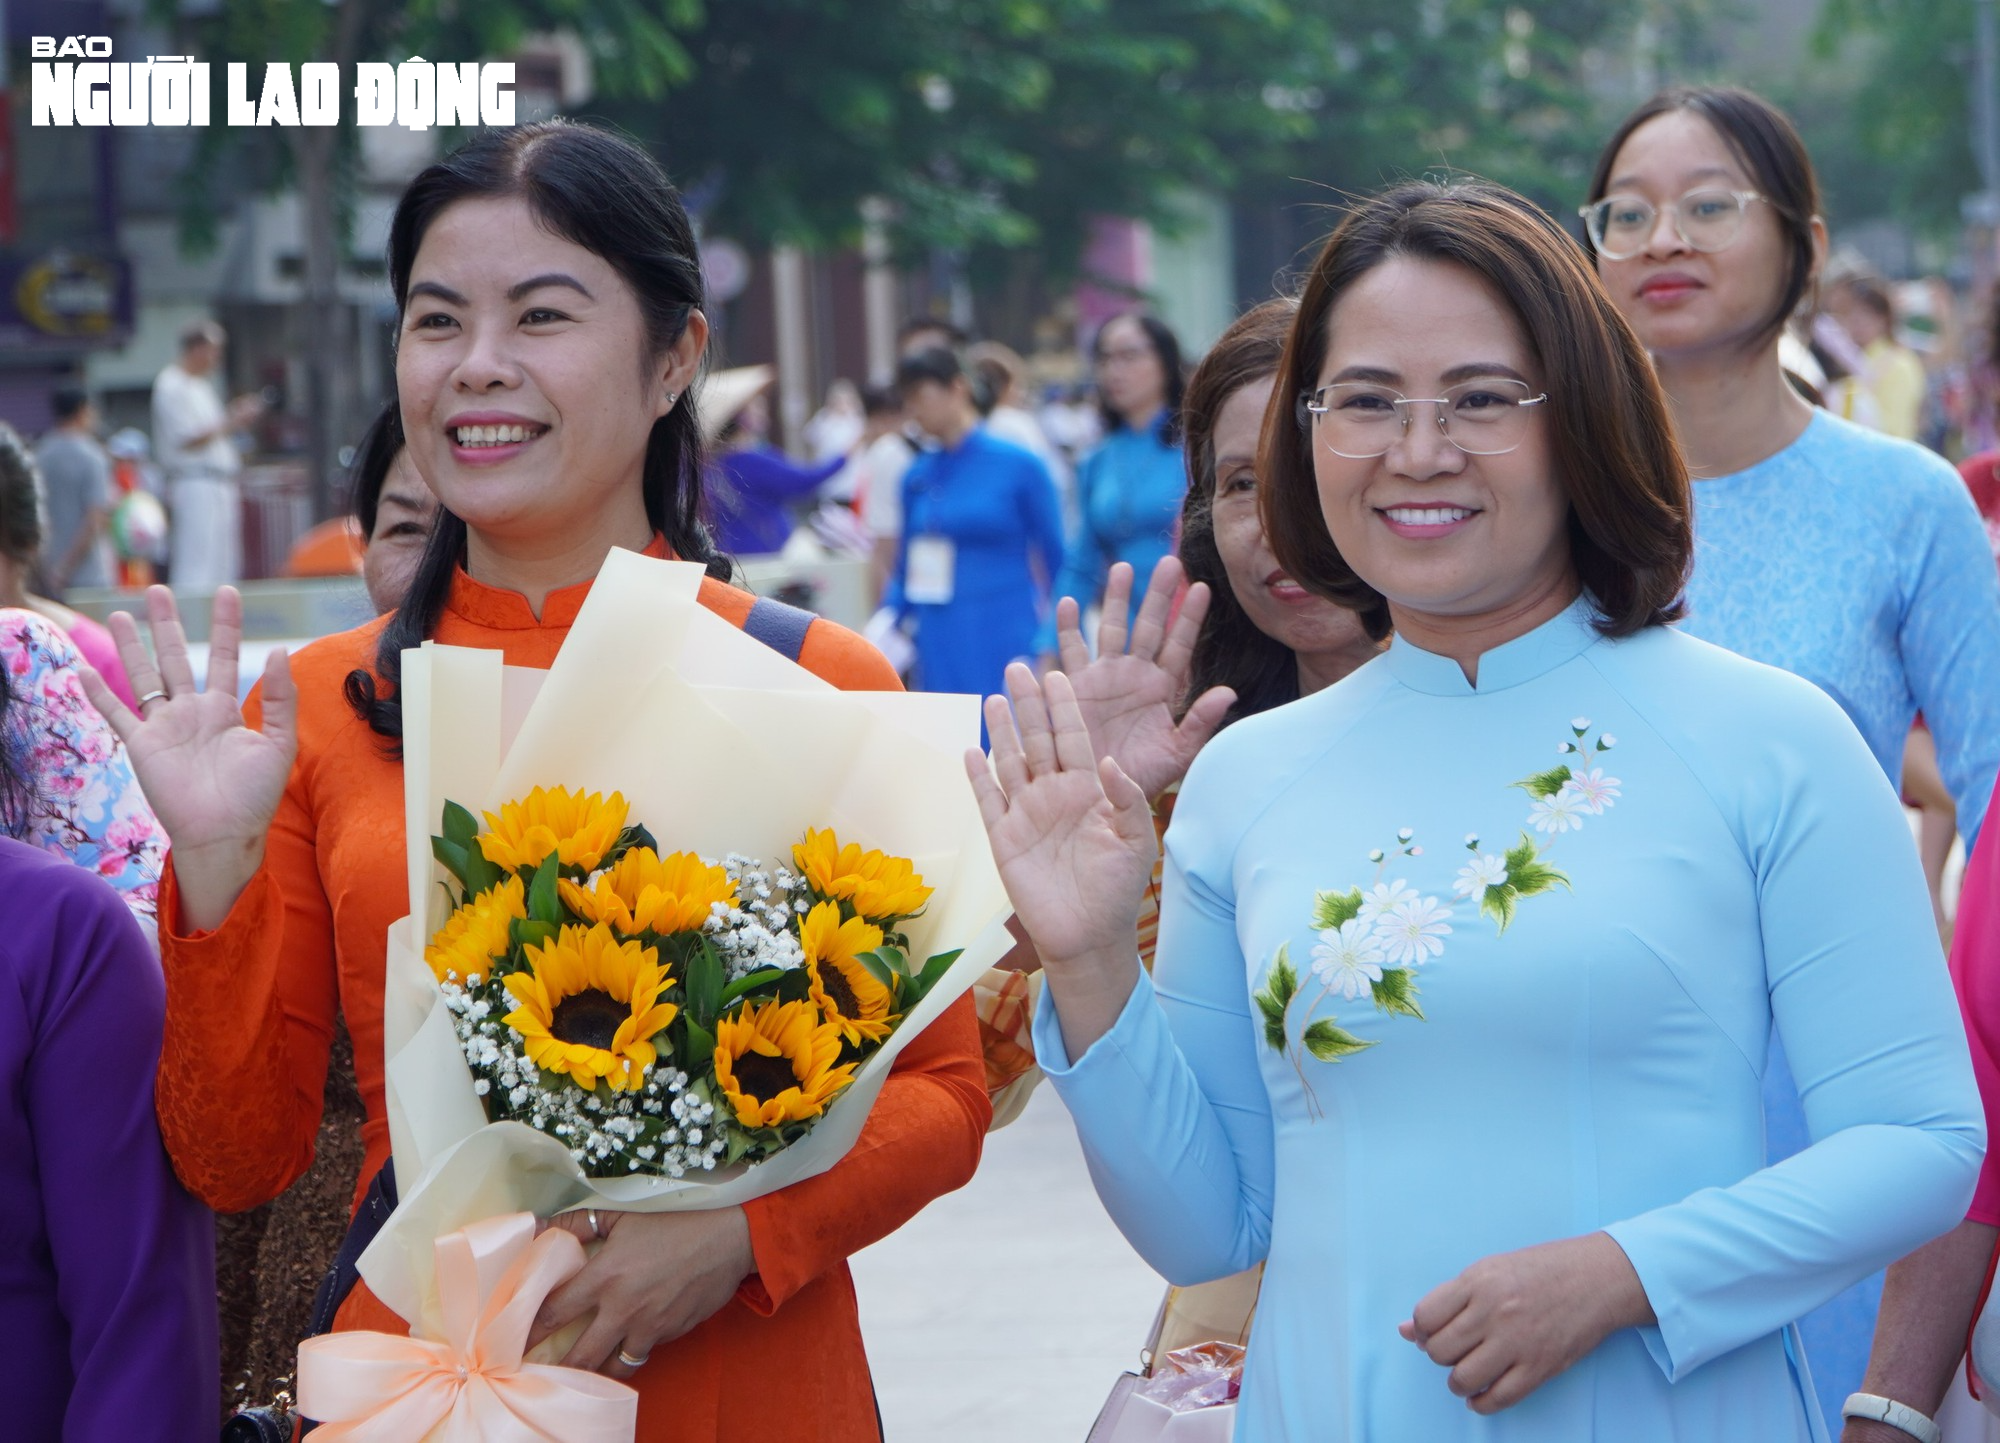 More than 3,000 people perform Ao Dai on the streets of Ho Chi Minh City - Photo 9.